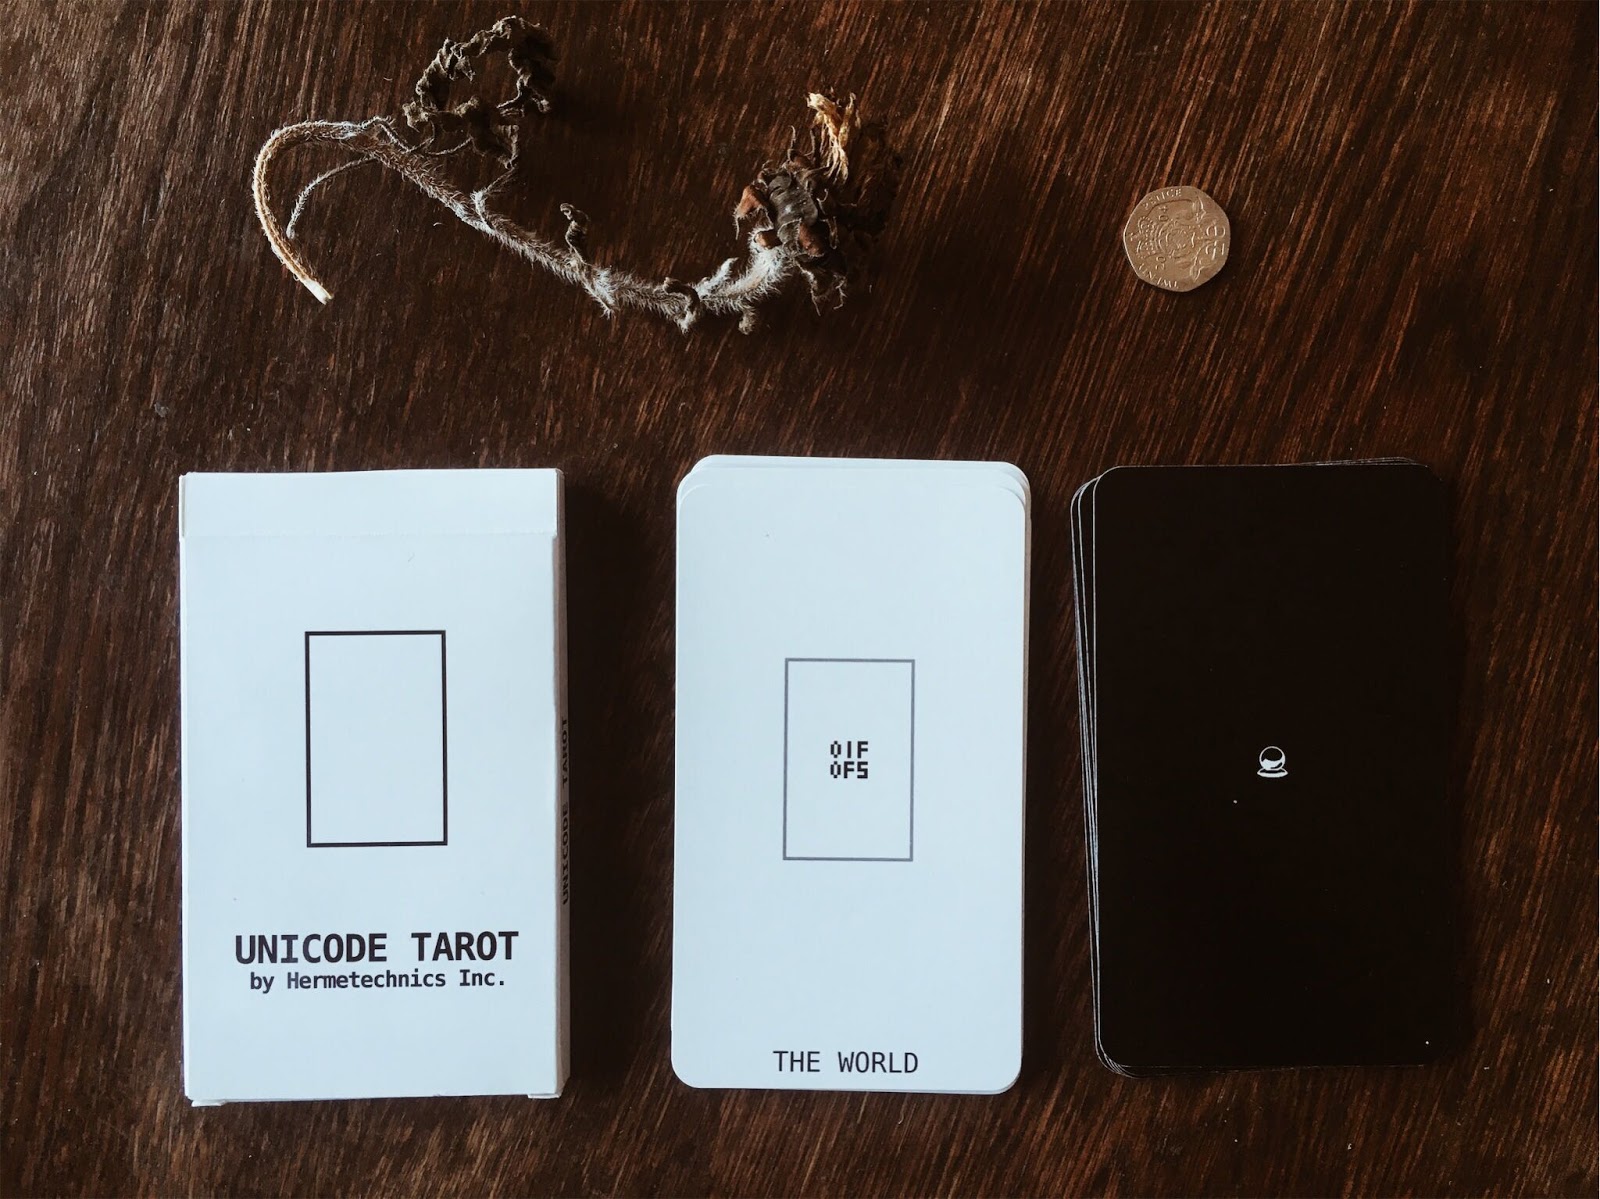 Unicode Tarot deck cards with box facing forward, the World card on top of deck